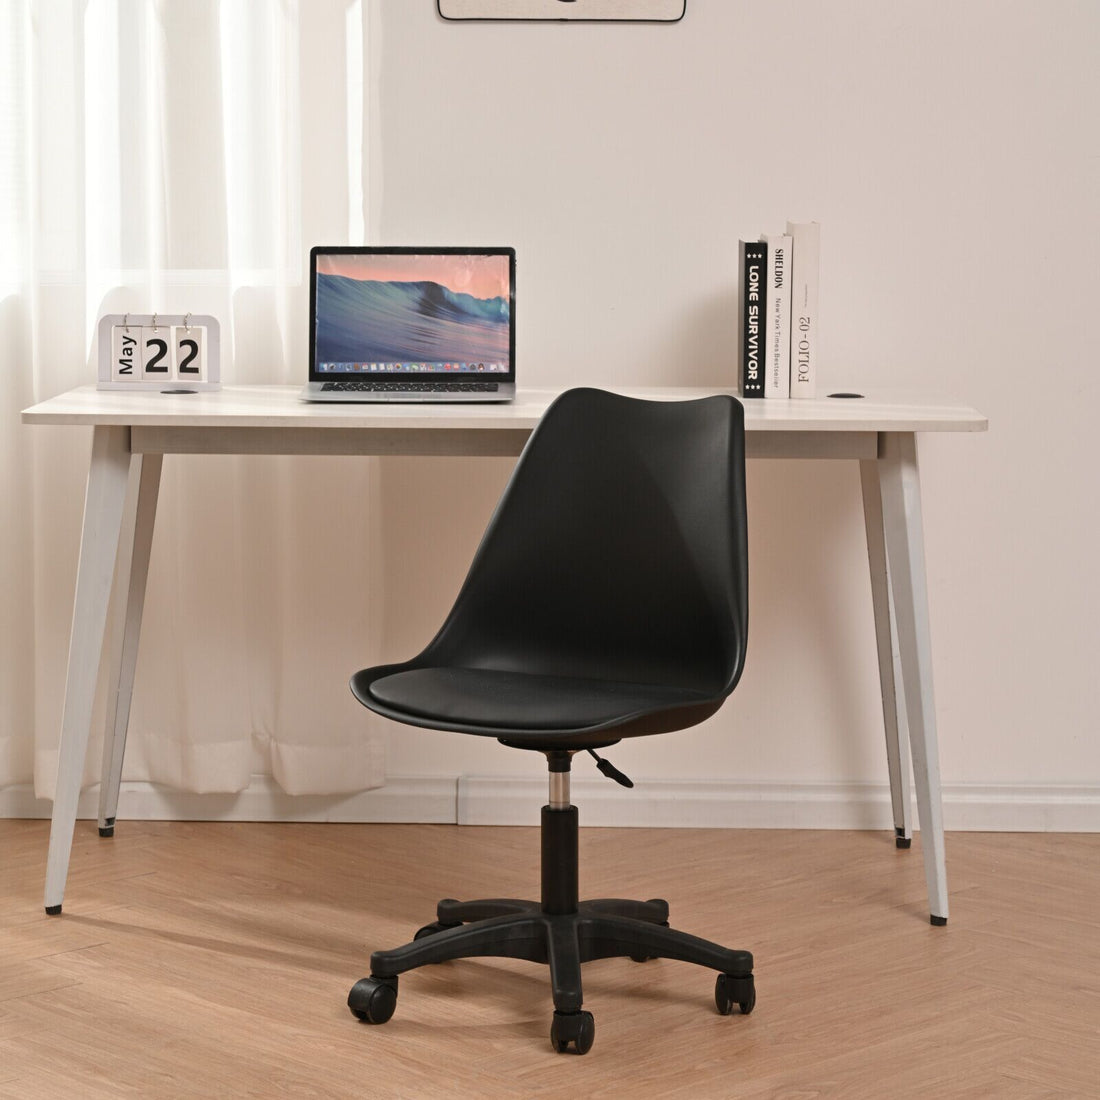 Black Pp With Wheels Adjustable Height Office